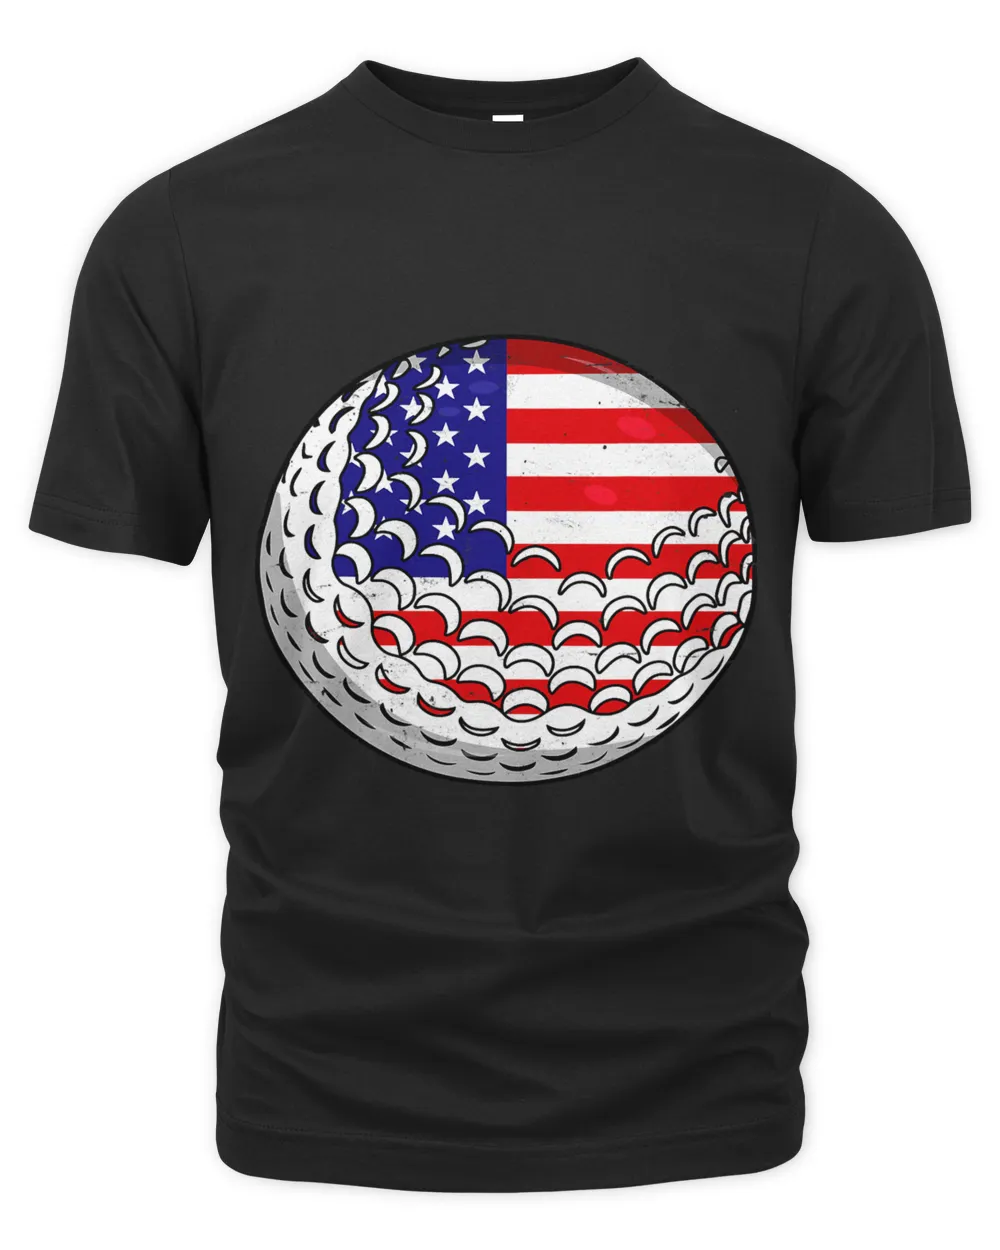 Vintage Golf American Flag Family Sport Matching